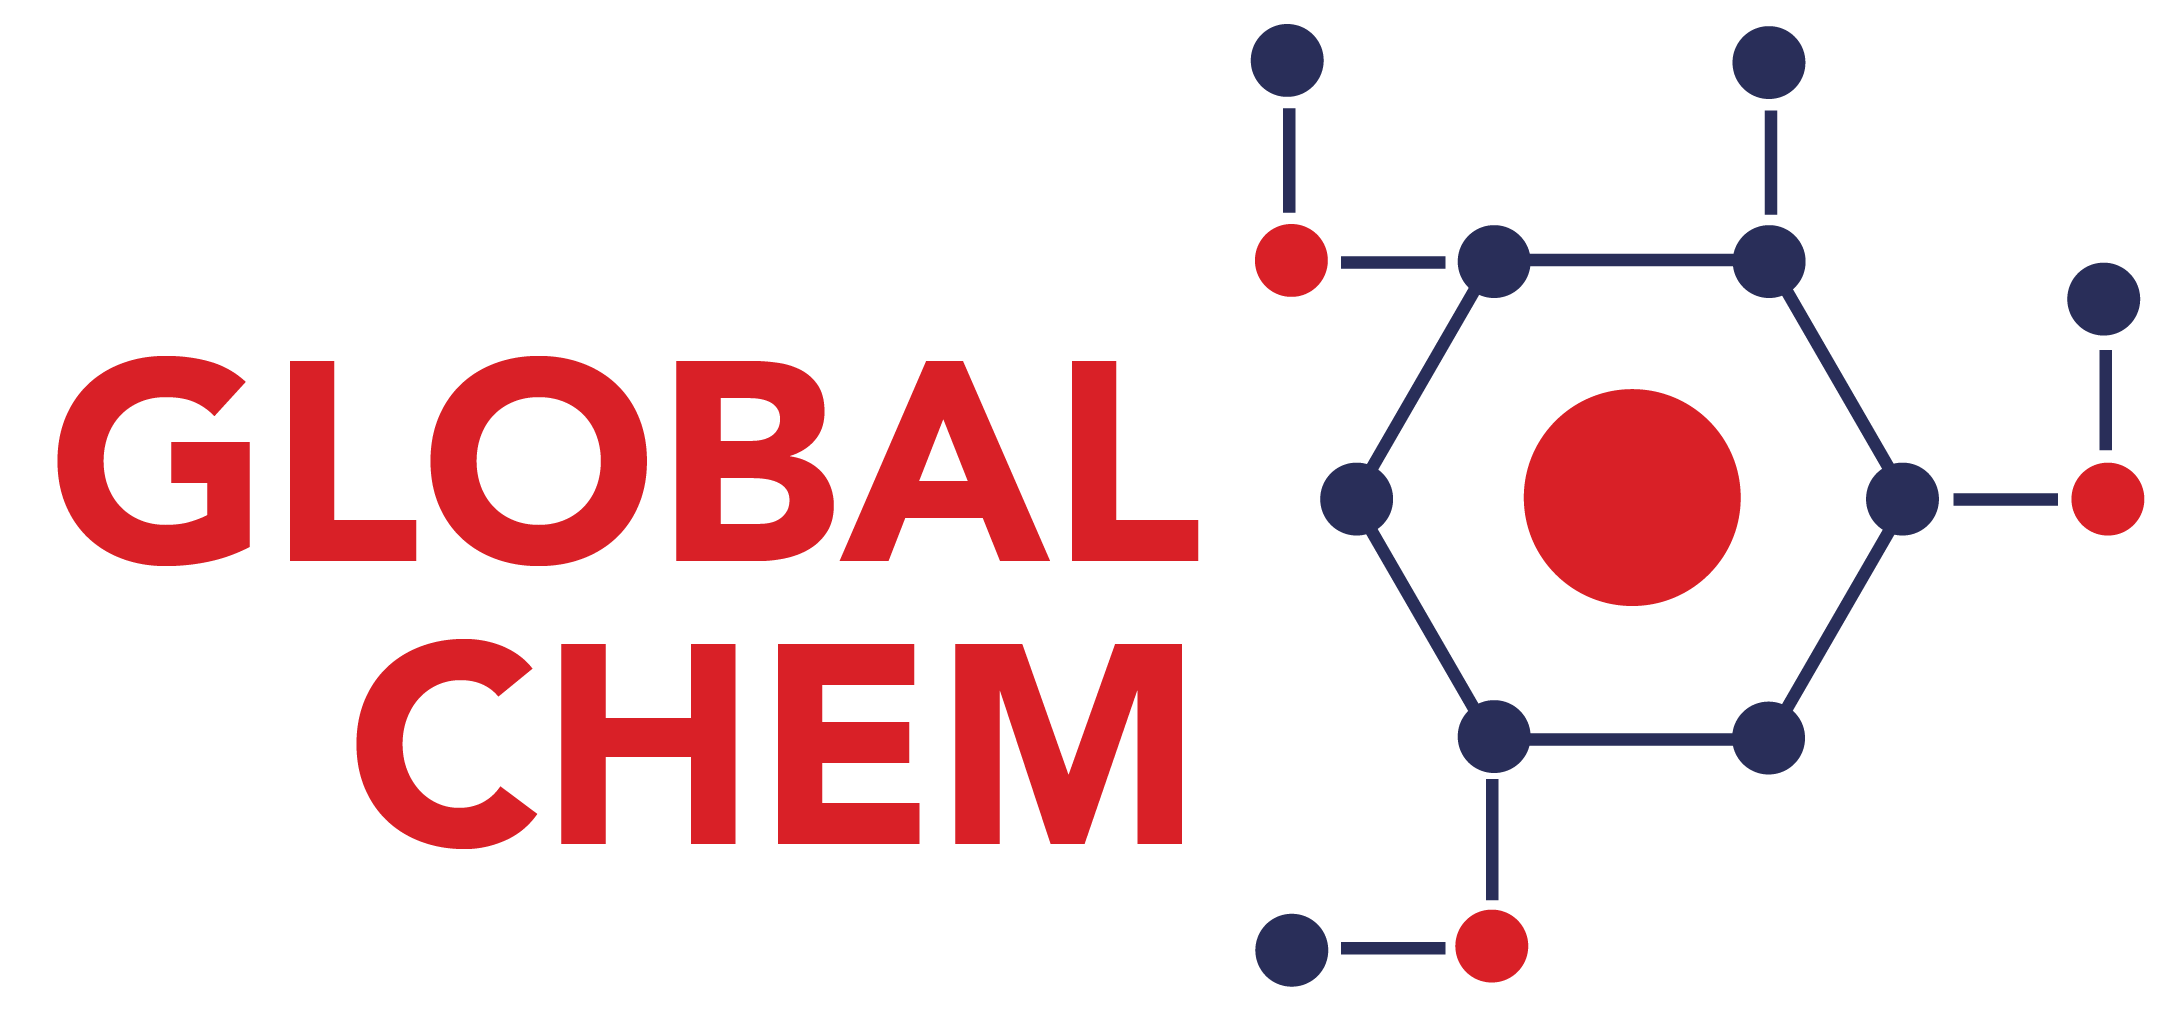 Global Chemistry written in red with a molecule on the right side in gray and red.